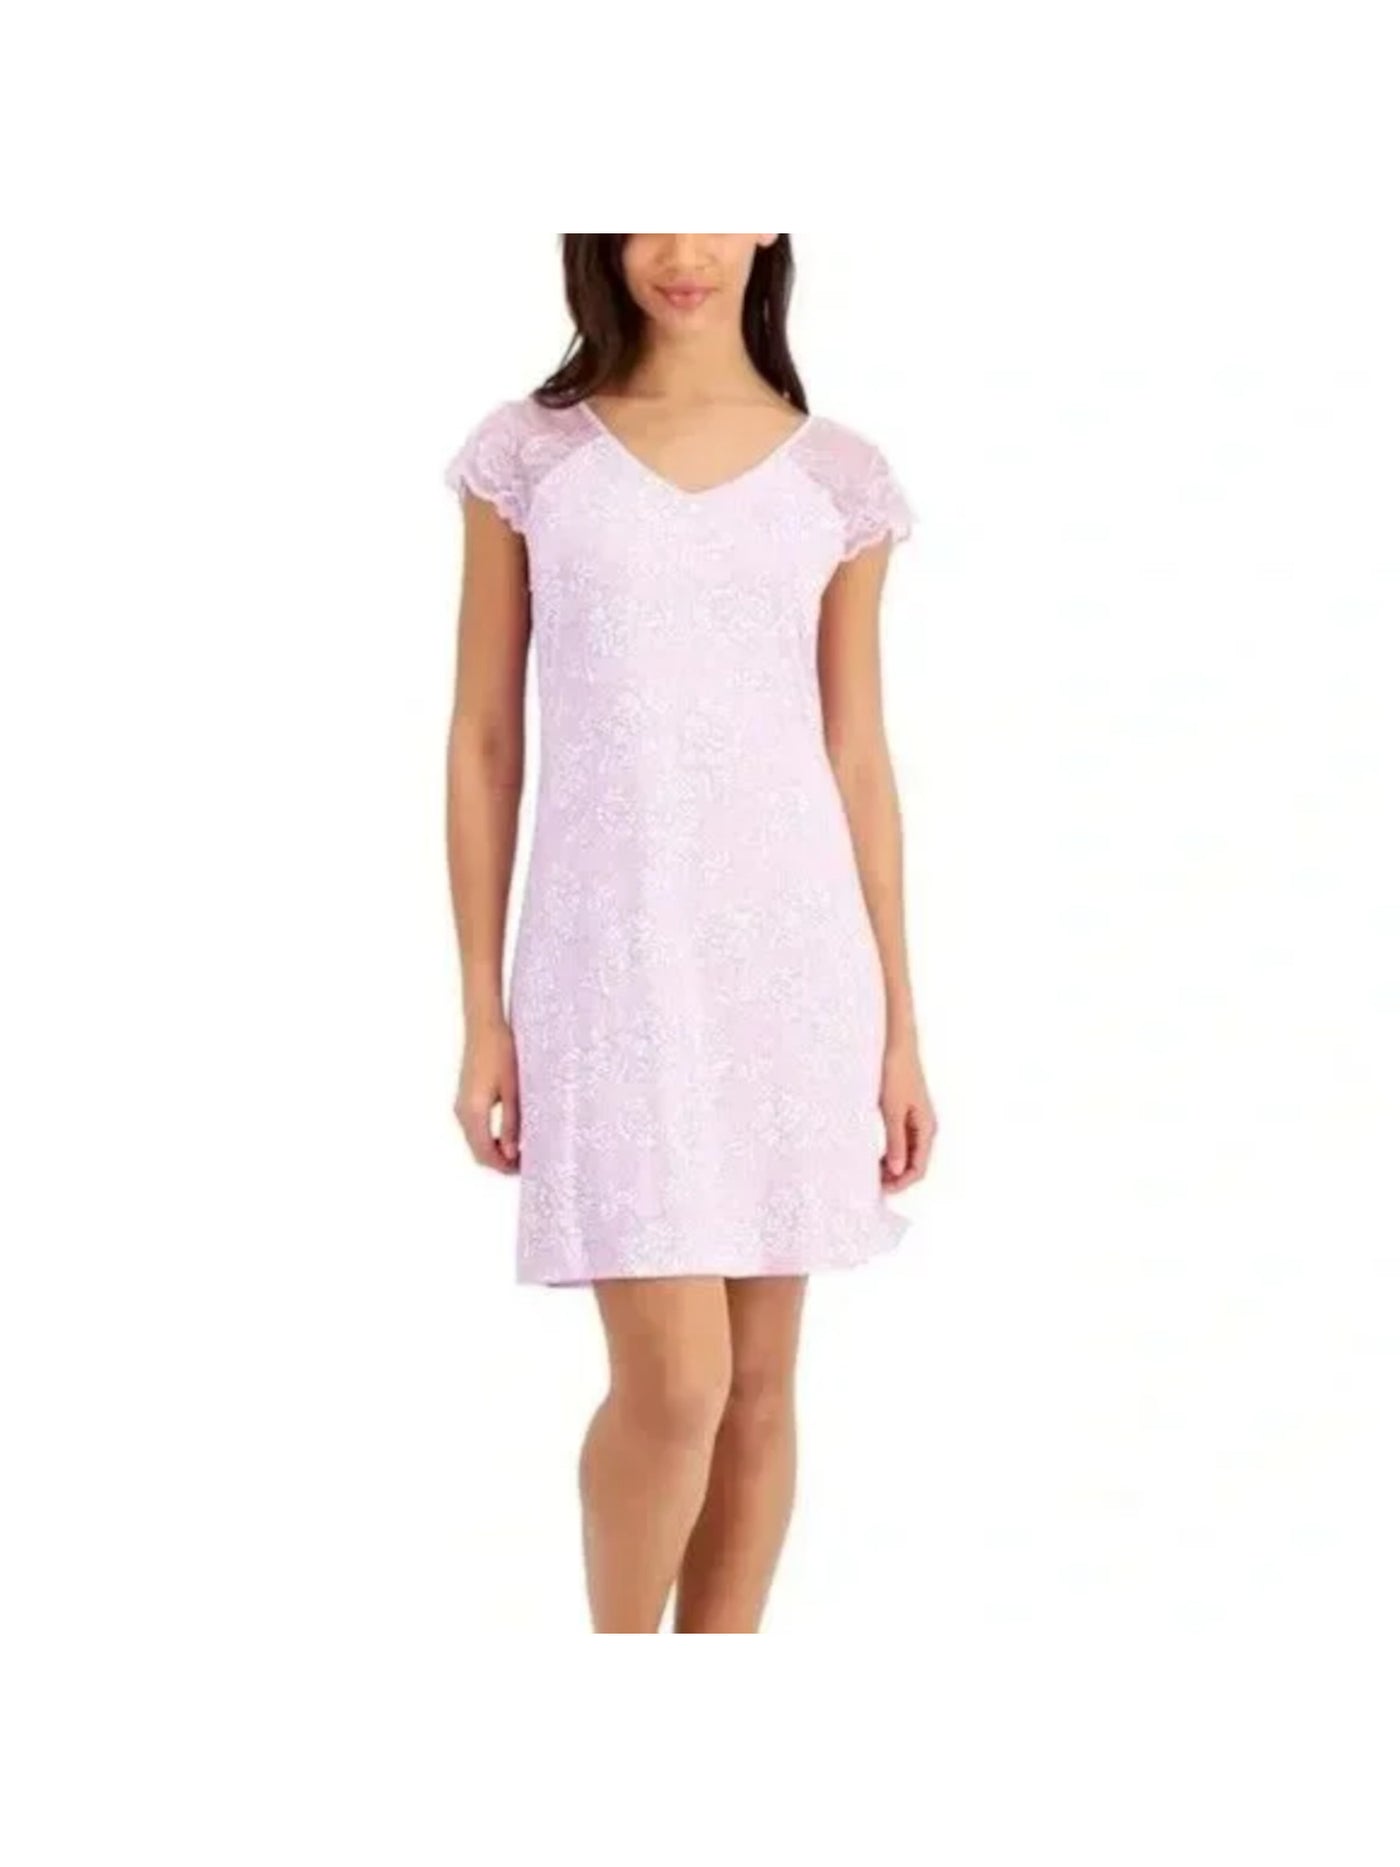 CHARTER CLUB Intimates Purple Knit Lace Short Sleeves Chemise Hits Above Knee Floral Nightgown XS